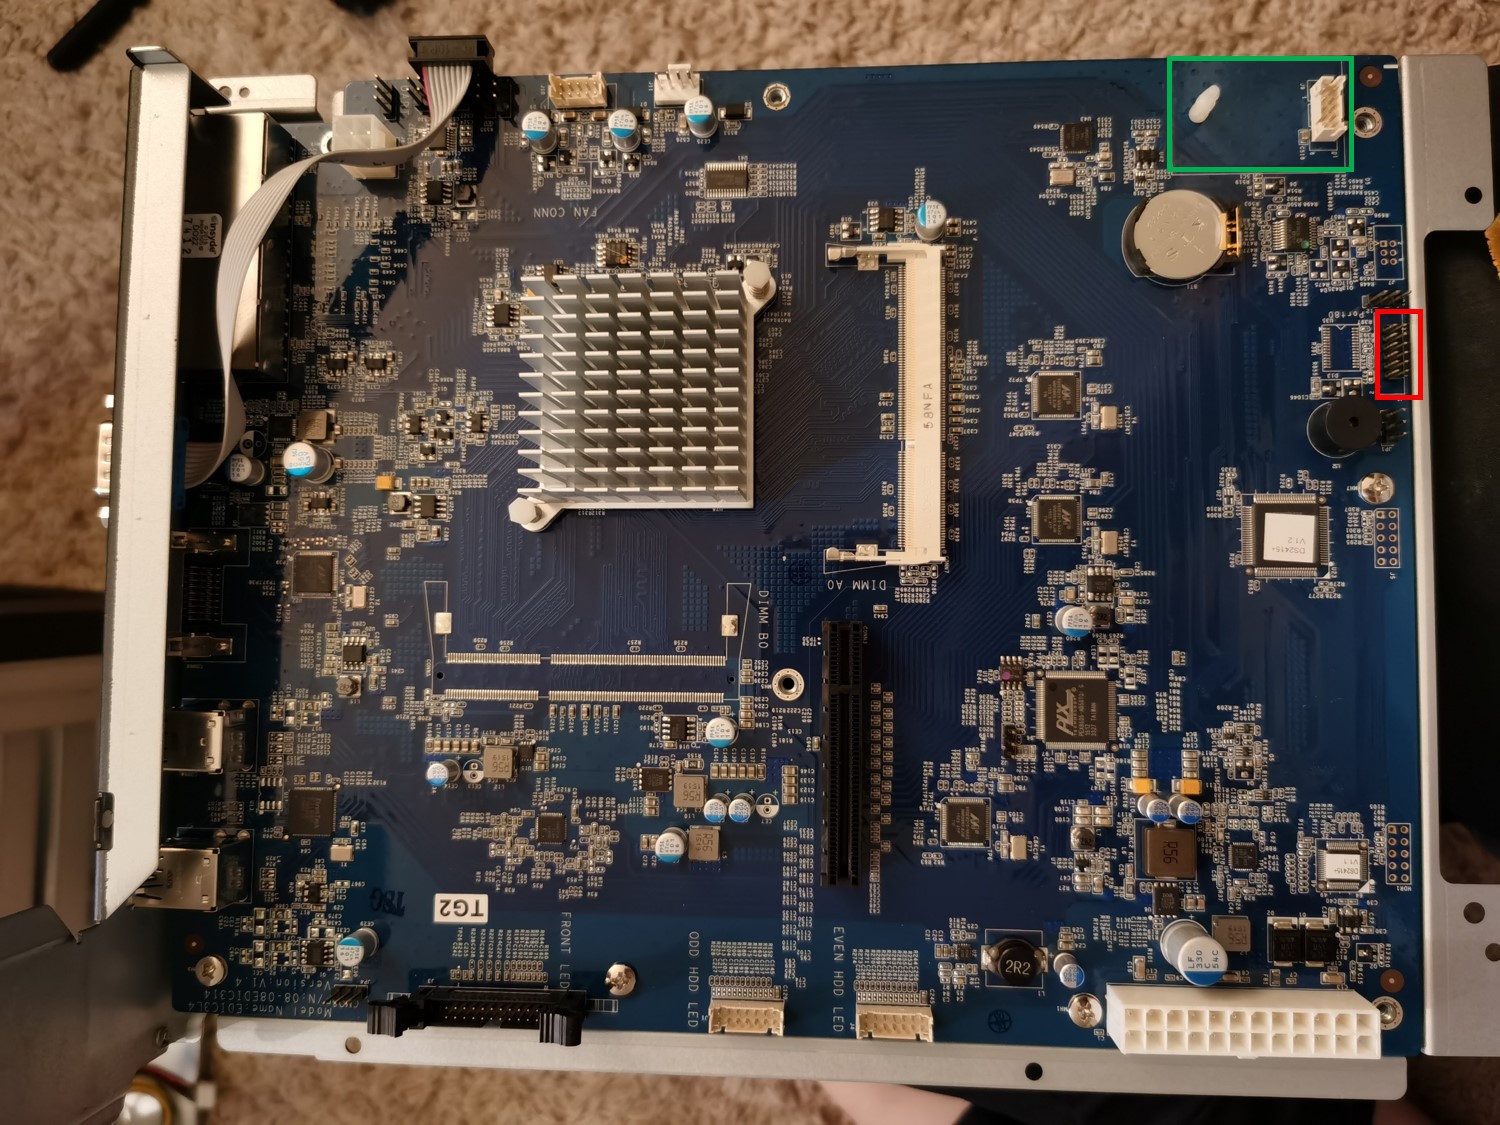 The motherboard of DS2415+